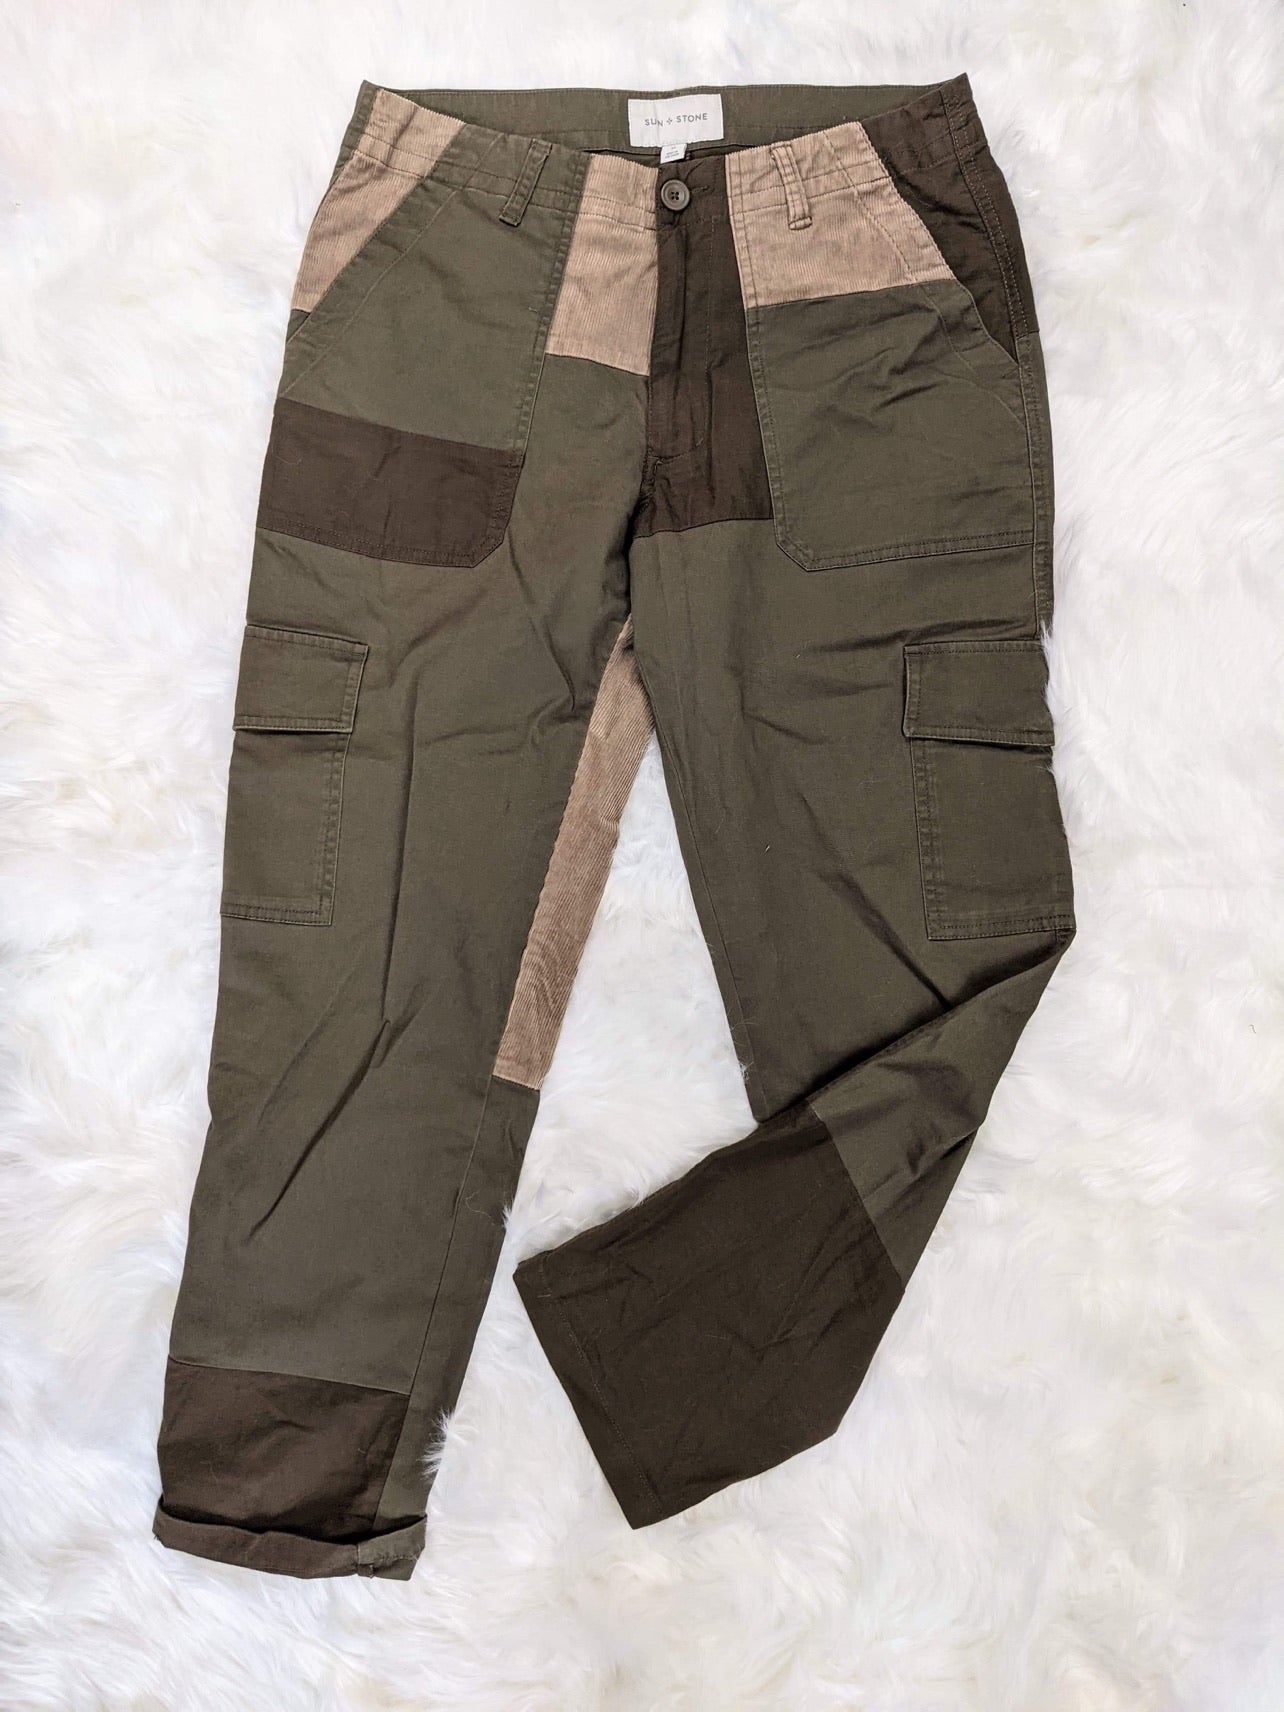 Women's Y2k Baggy Cargo Pants Low Waist Relaxed Fit Straight Wide